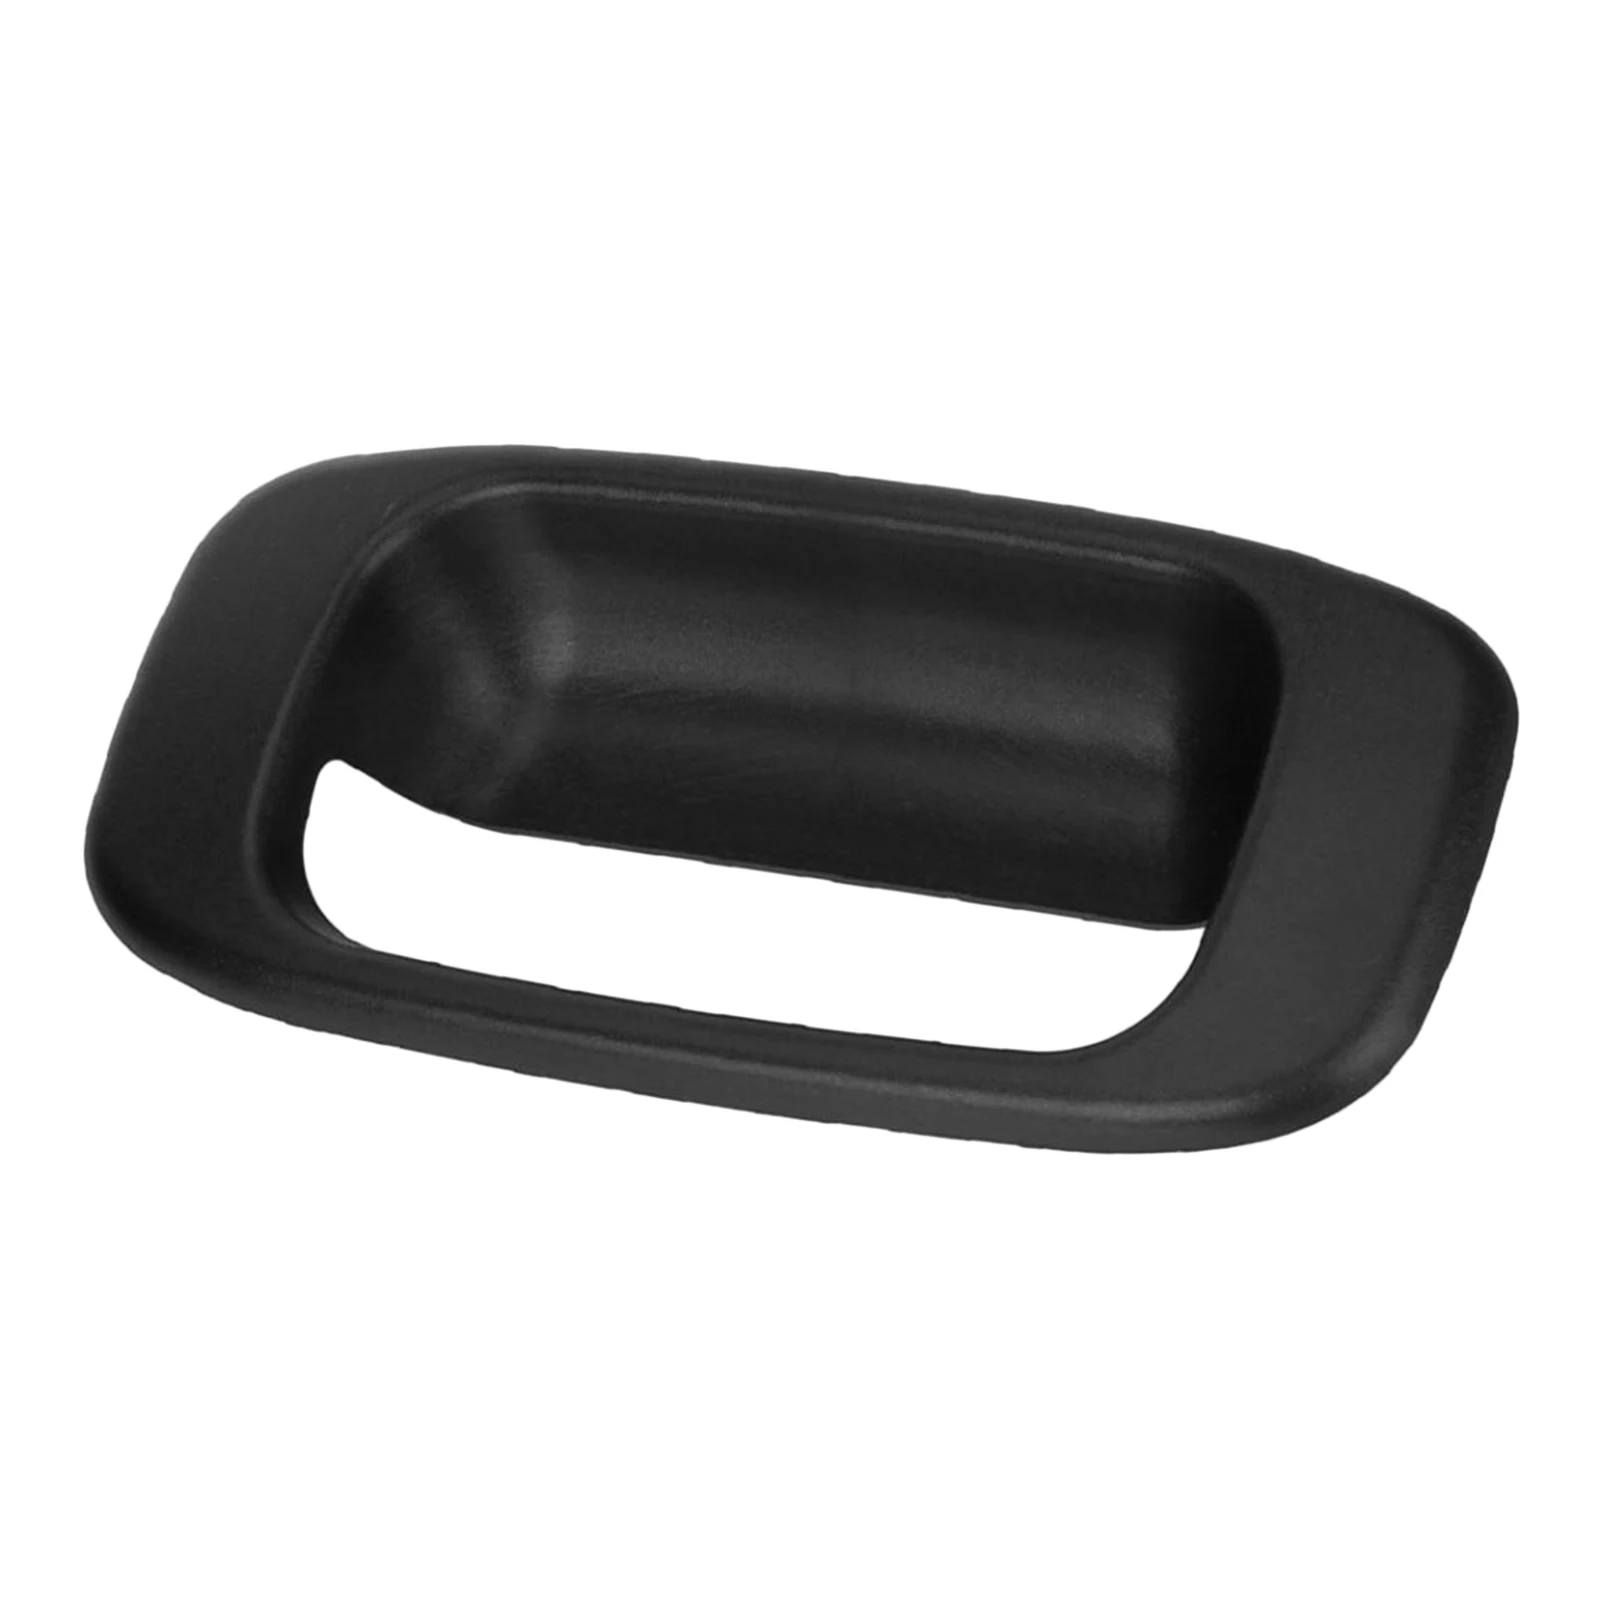 Car Tail Gate Handle Bezel Replacement Parts Fit for Chevrolet Silverado 1500 HD Classic 2007